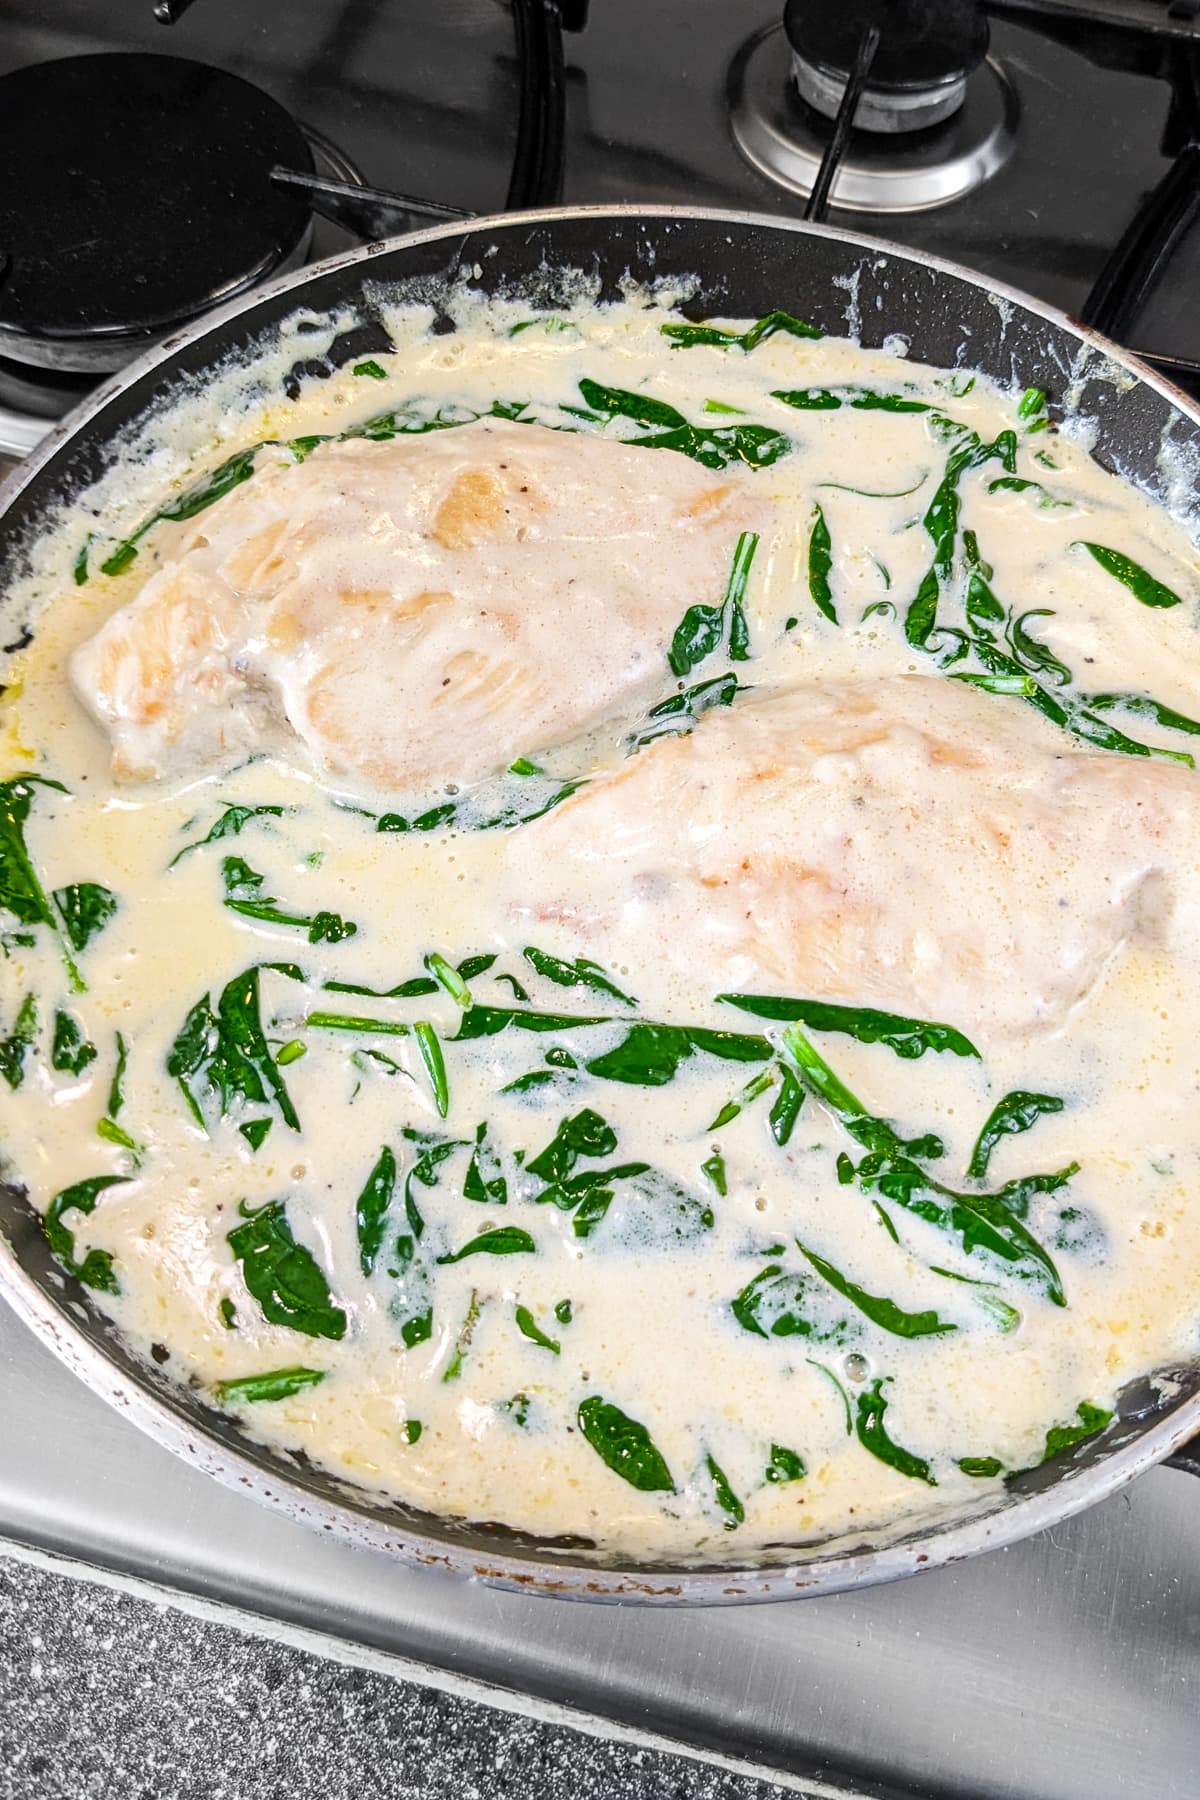 Ala king sauce with spinach and chicken fillets.